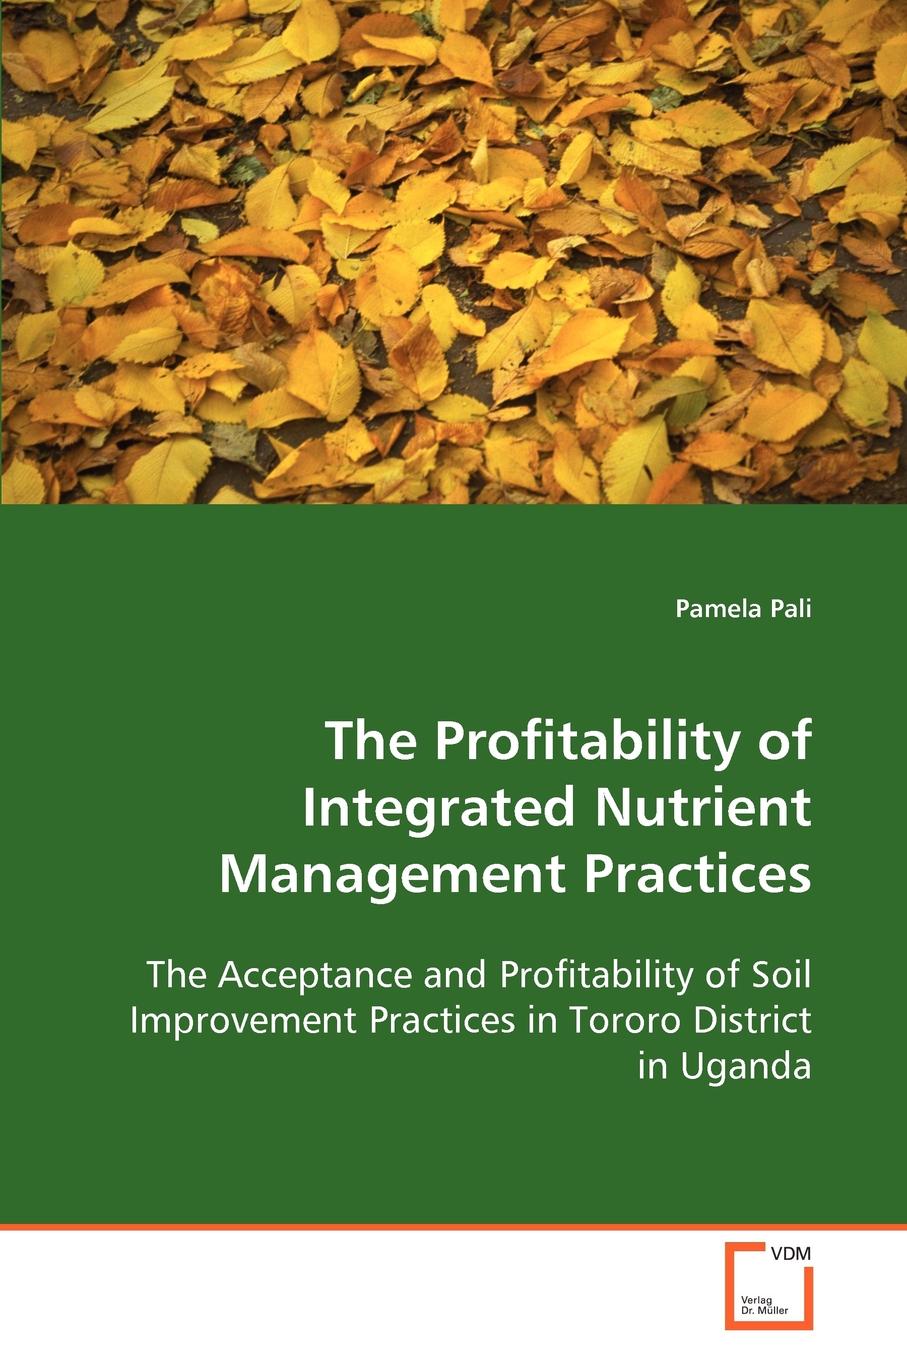 The Profitability of Integrated Nutrient Management Practices